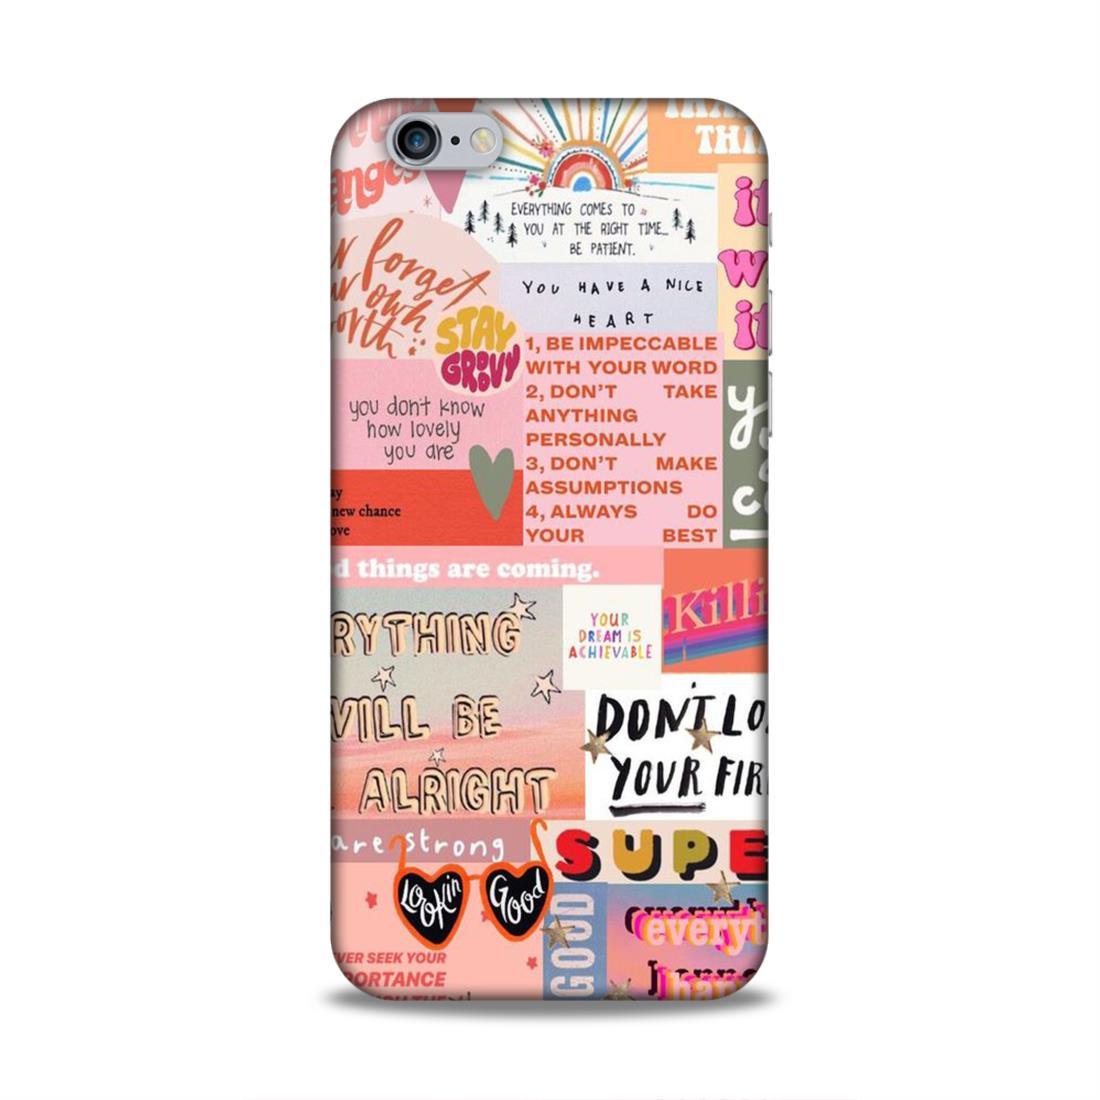 Have A Nice Heart iPhone 6 Phone Cover Case